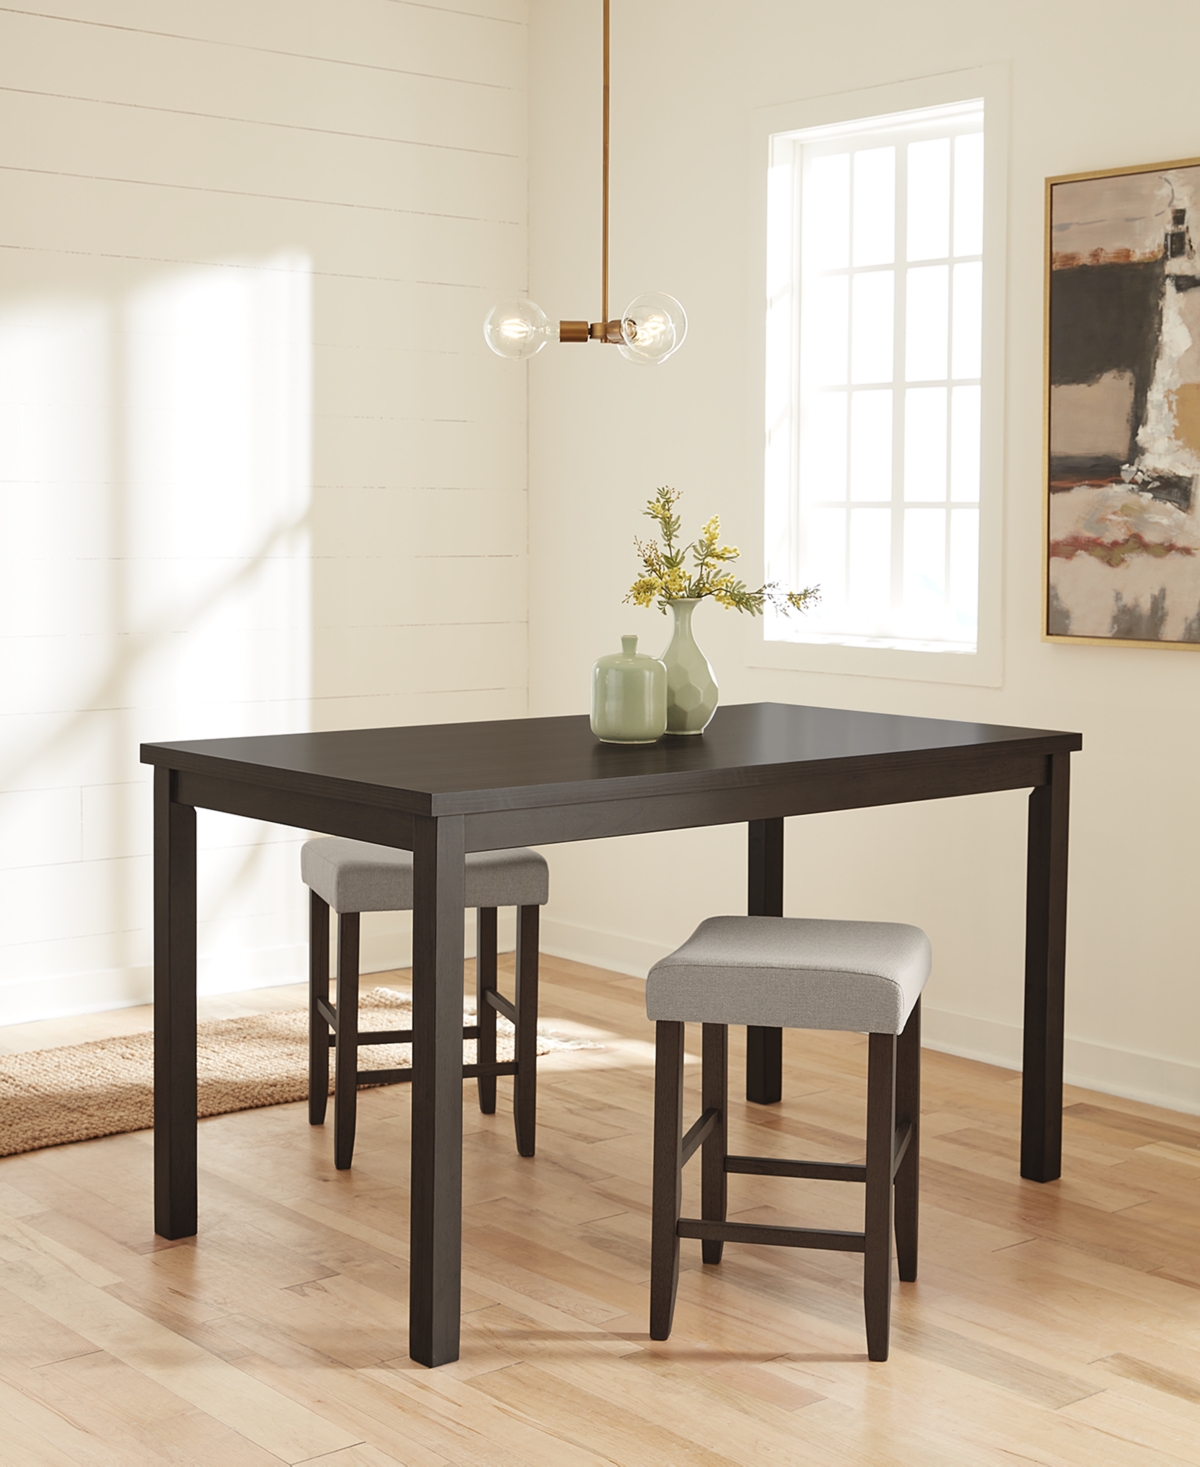 Macy's Closeout! Max Meadows Laminate 3-pc Dining Set (rectangular Table + 2 Stools) In Dark Brown